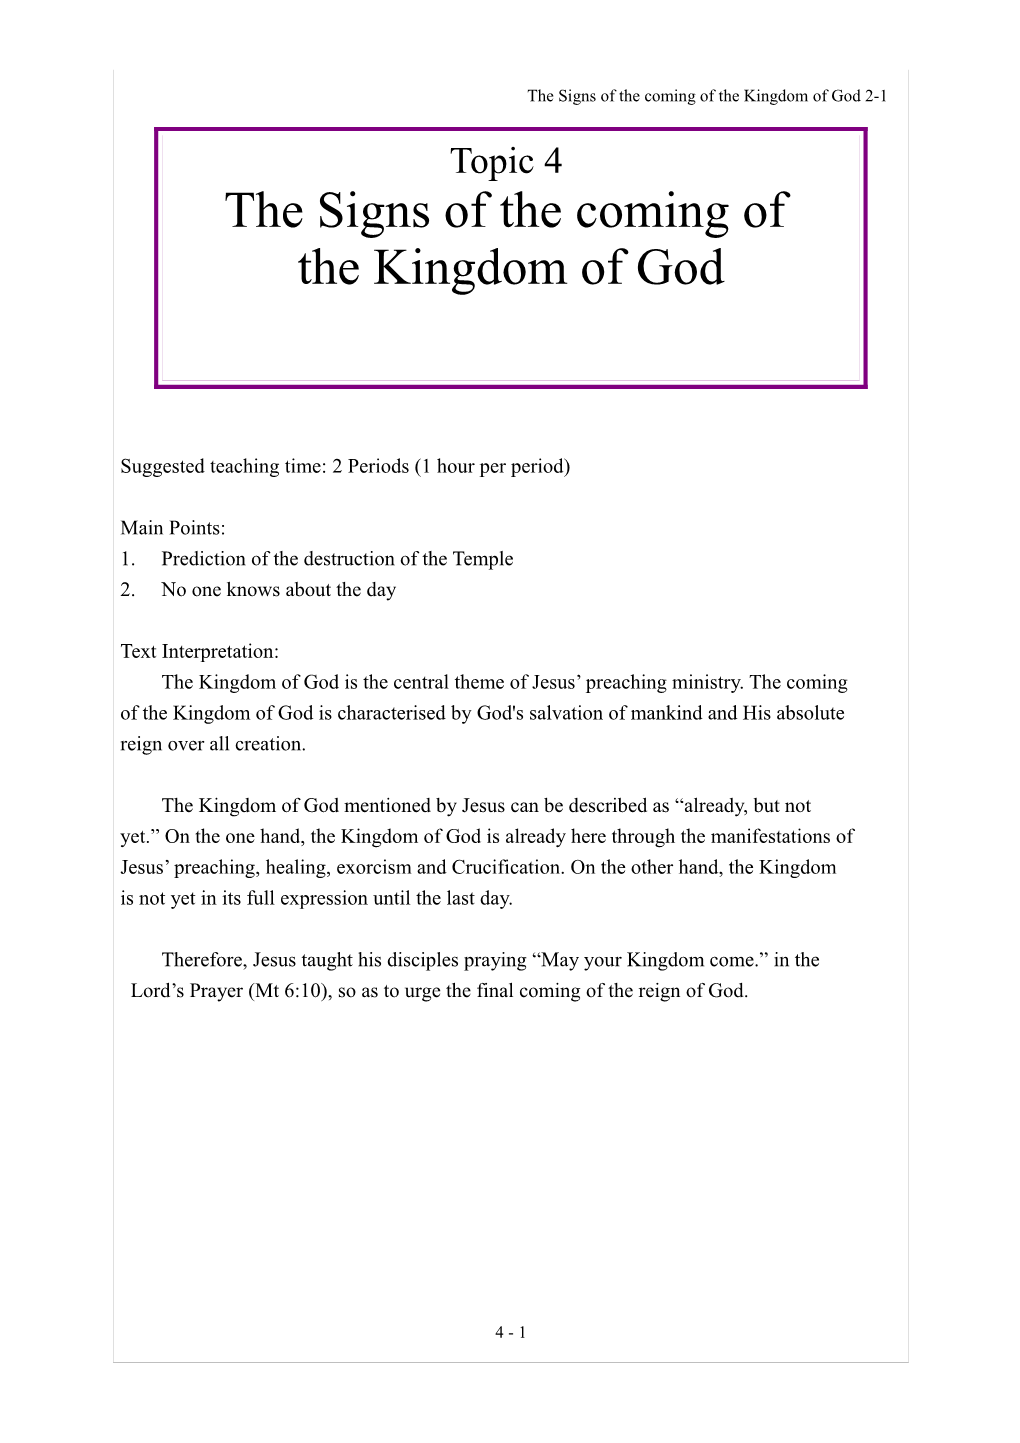 The Signs of the Coming of the Kingdom of God 2-1